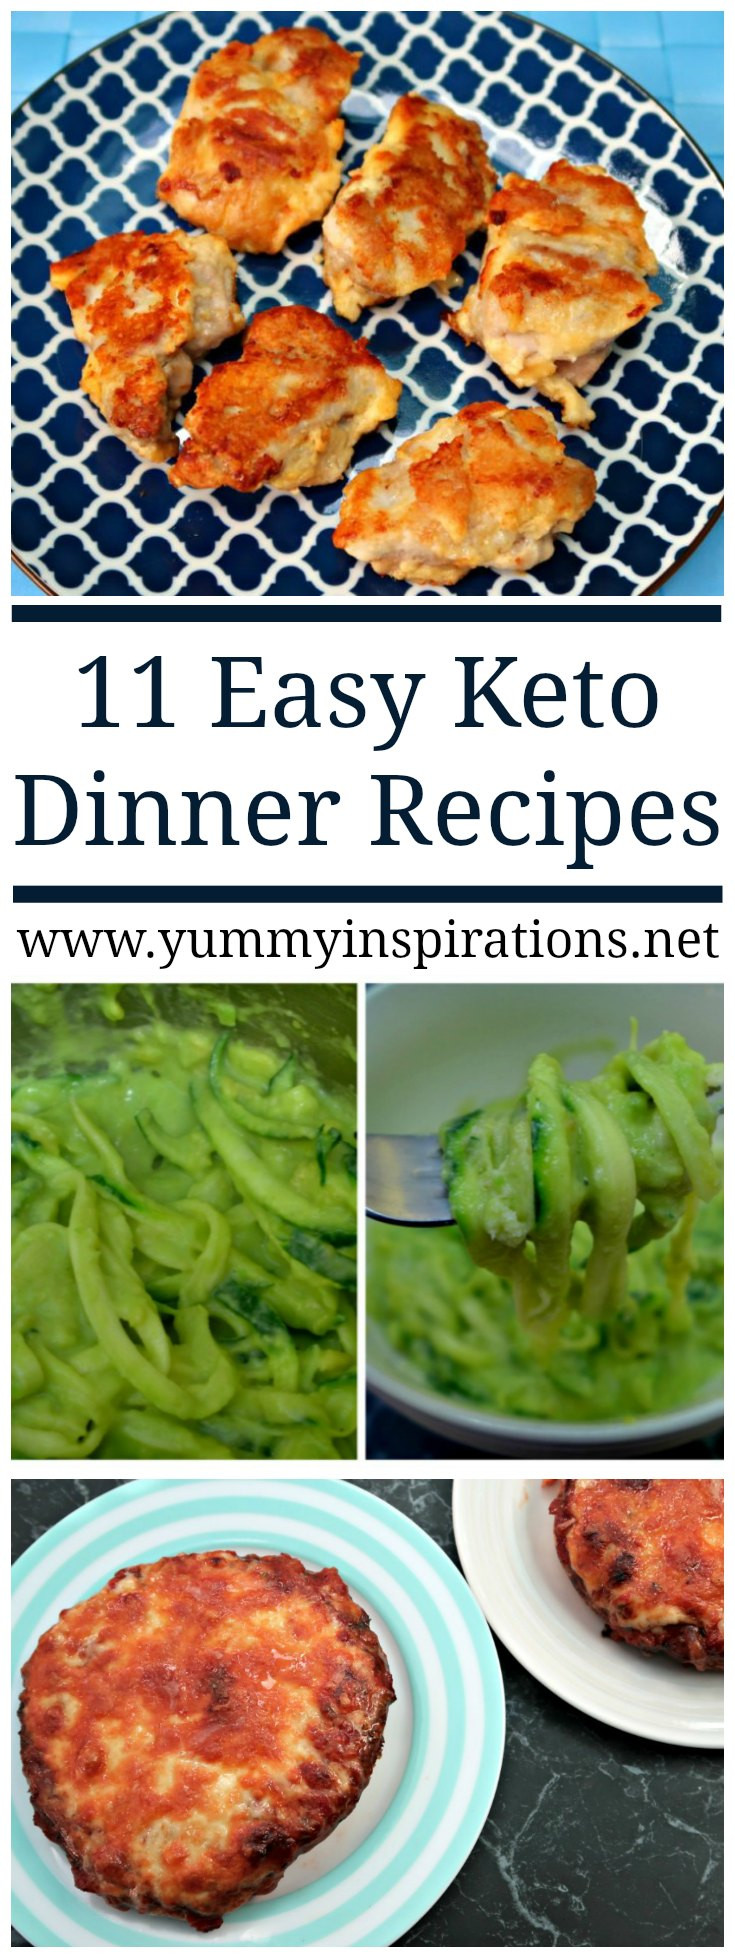 Quick And Easy Keto Recipes
 11 Easy Keto Dinner Recipes Quick Low Carb Ketogenic